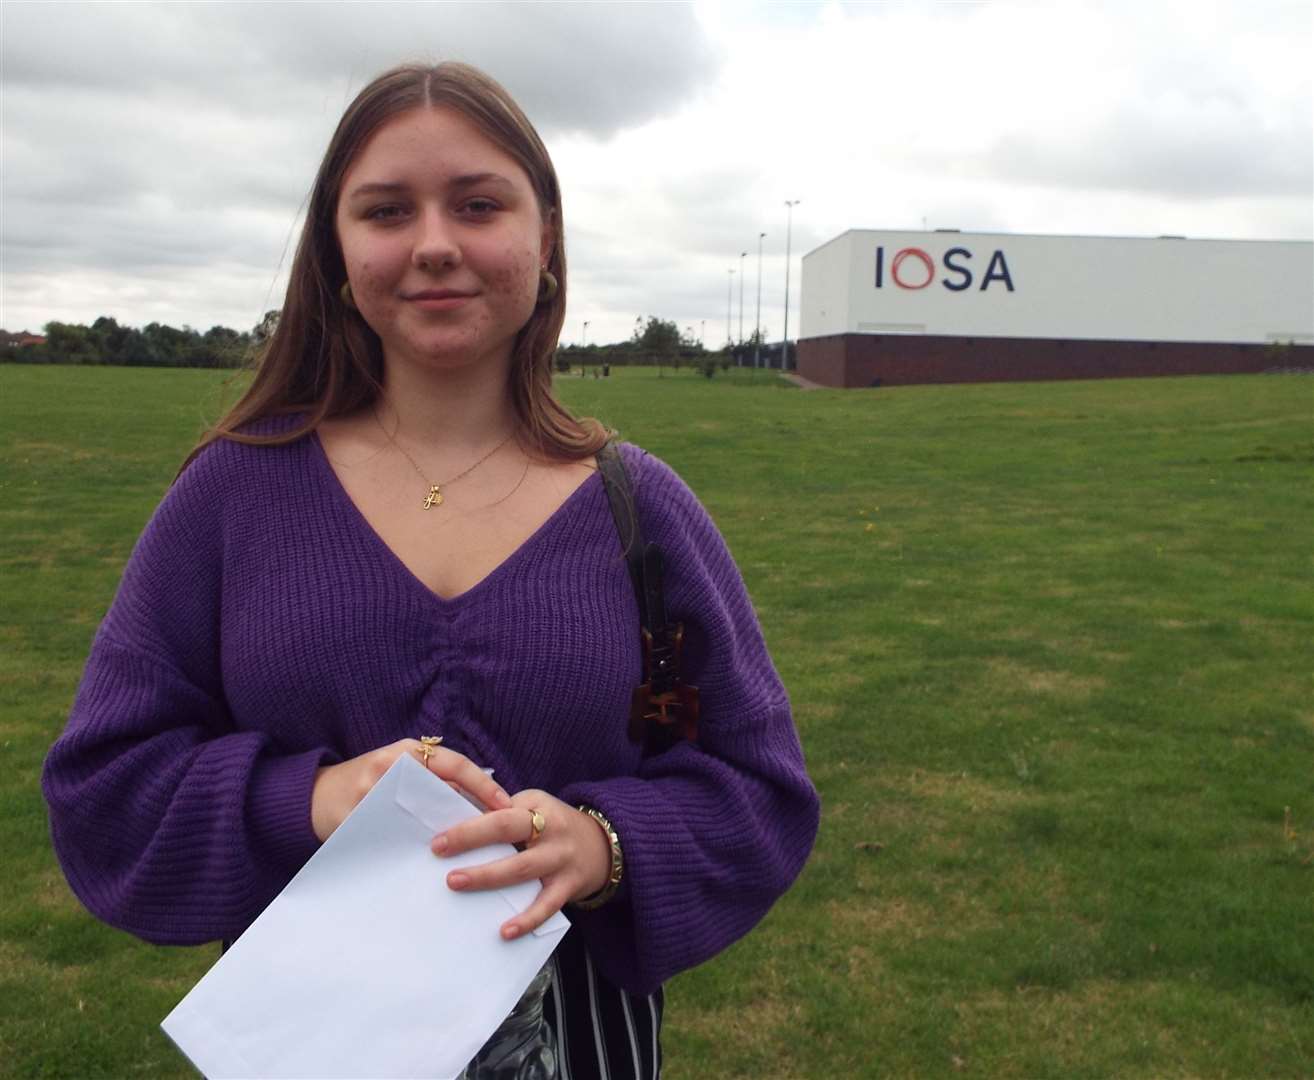 Oasis Isle of Sheppey Academy pupil Maja Druzynska, 16, from Sittingbourne with her GCSE results